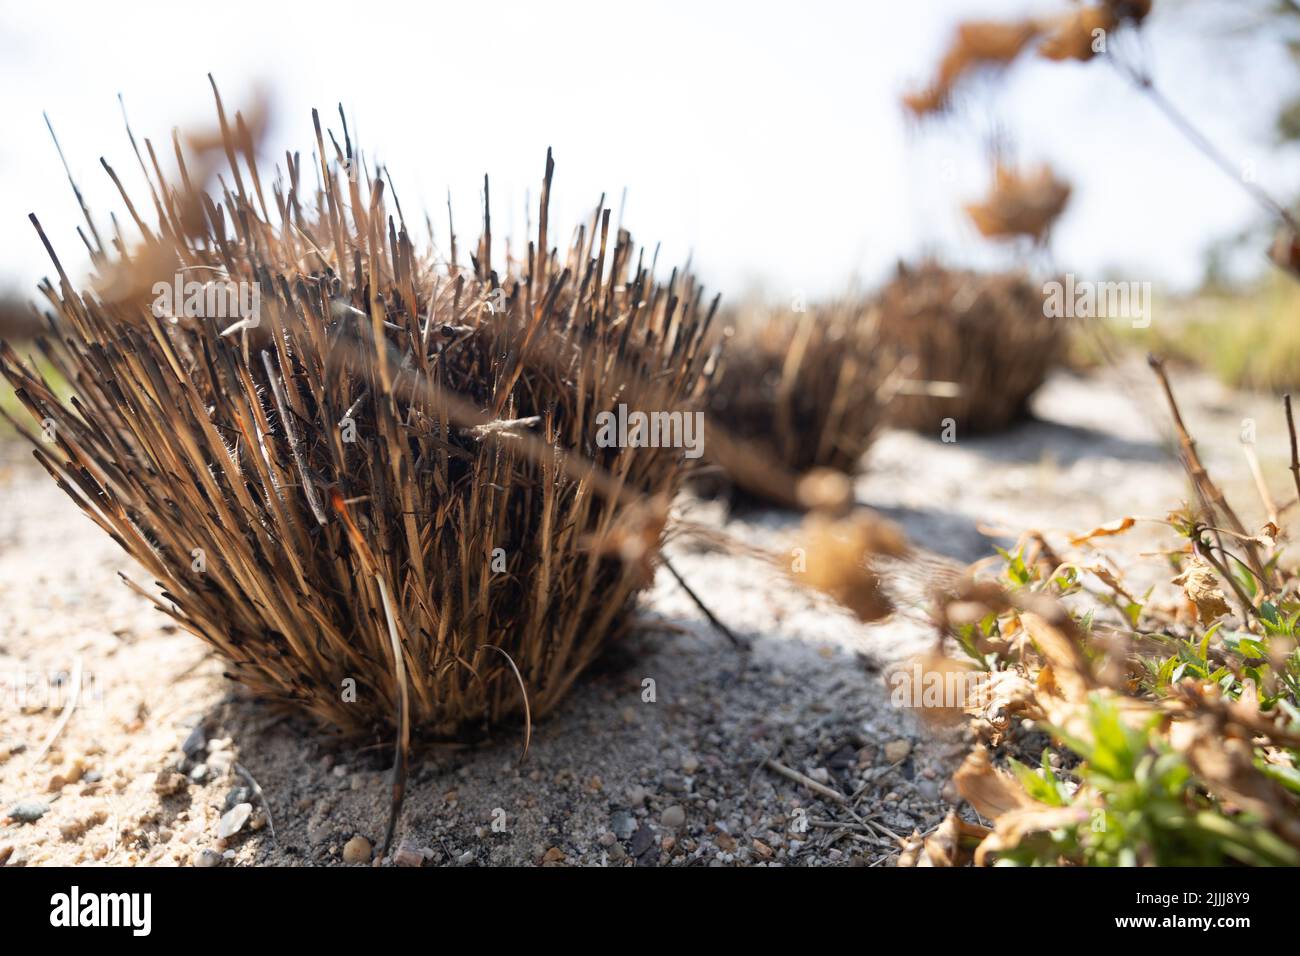 A selective focus on a dry gray clubawn grass Stock Photo